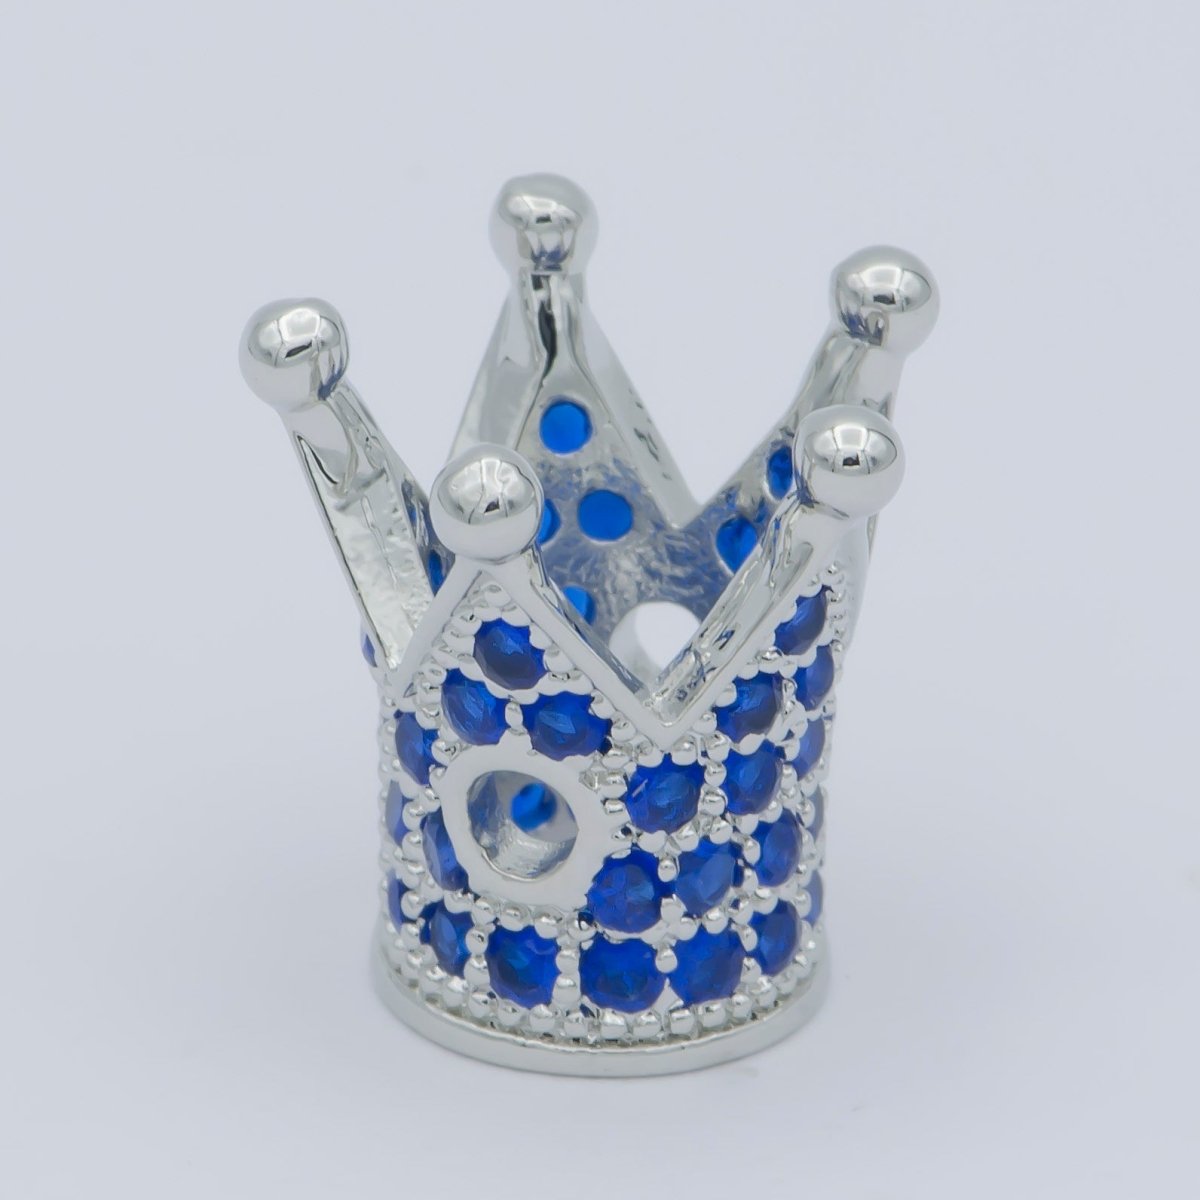 Mini Silver Crown Beads Blue CZ Crystal Small Simple King Queen Crown Model Jewelry Making Beads B-565 - DLUXCA